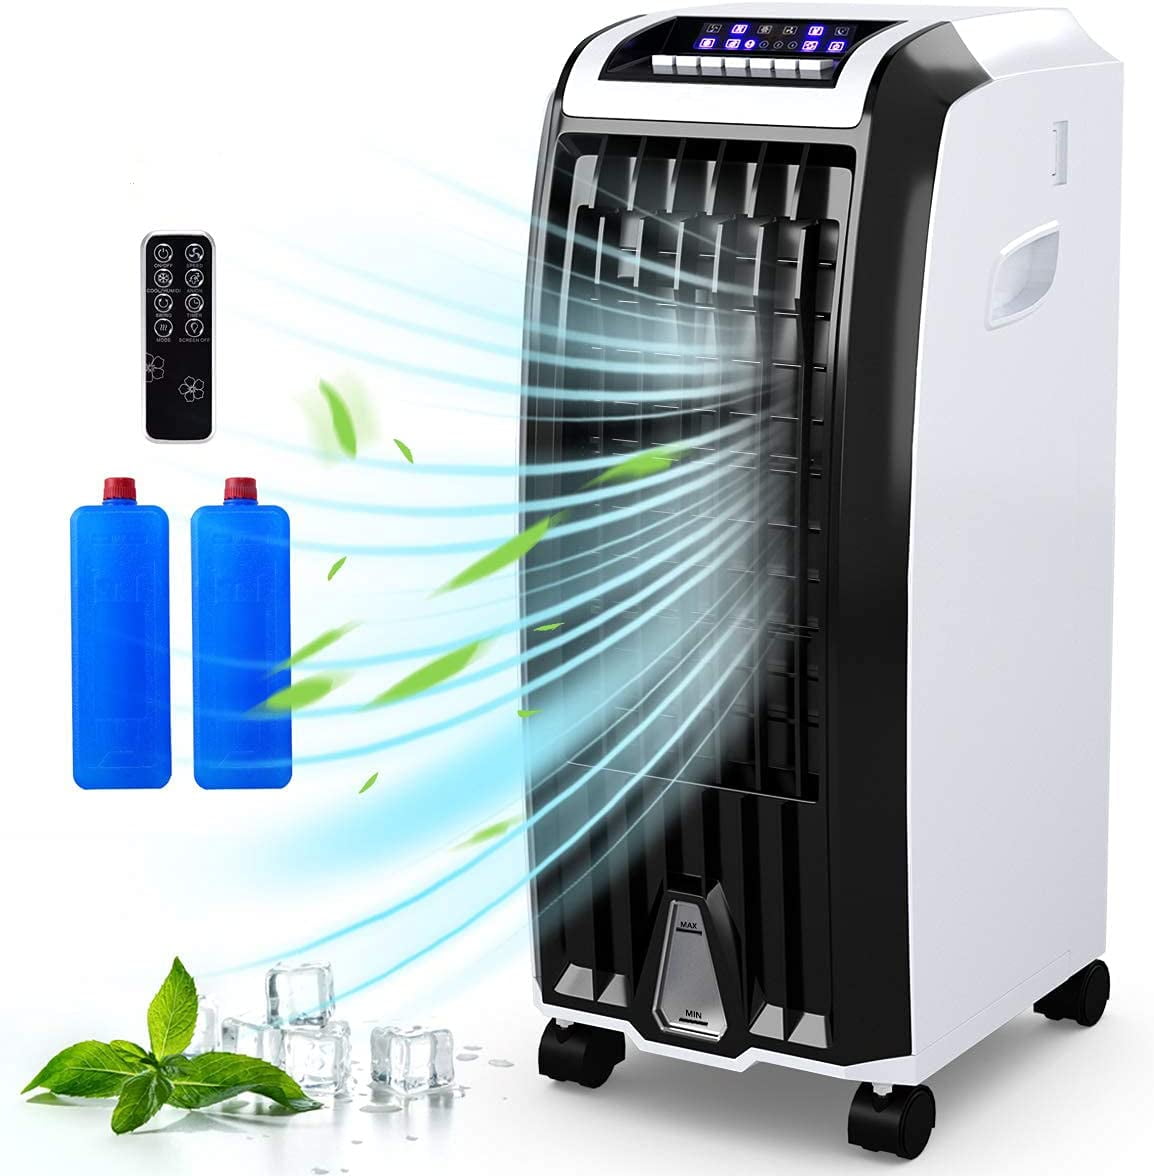 Evaporative Air Cooler Portable Bladeless Air Conditioner Office 3 Speeds Room 7.5-Hour Timer Humidifiers Function for Home 